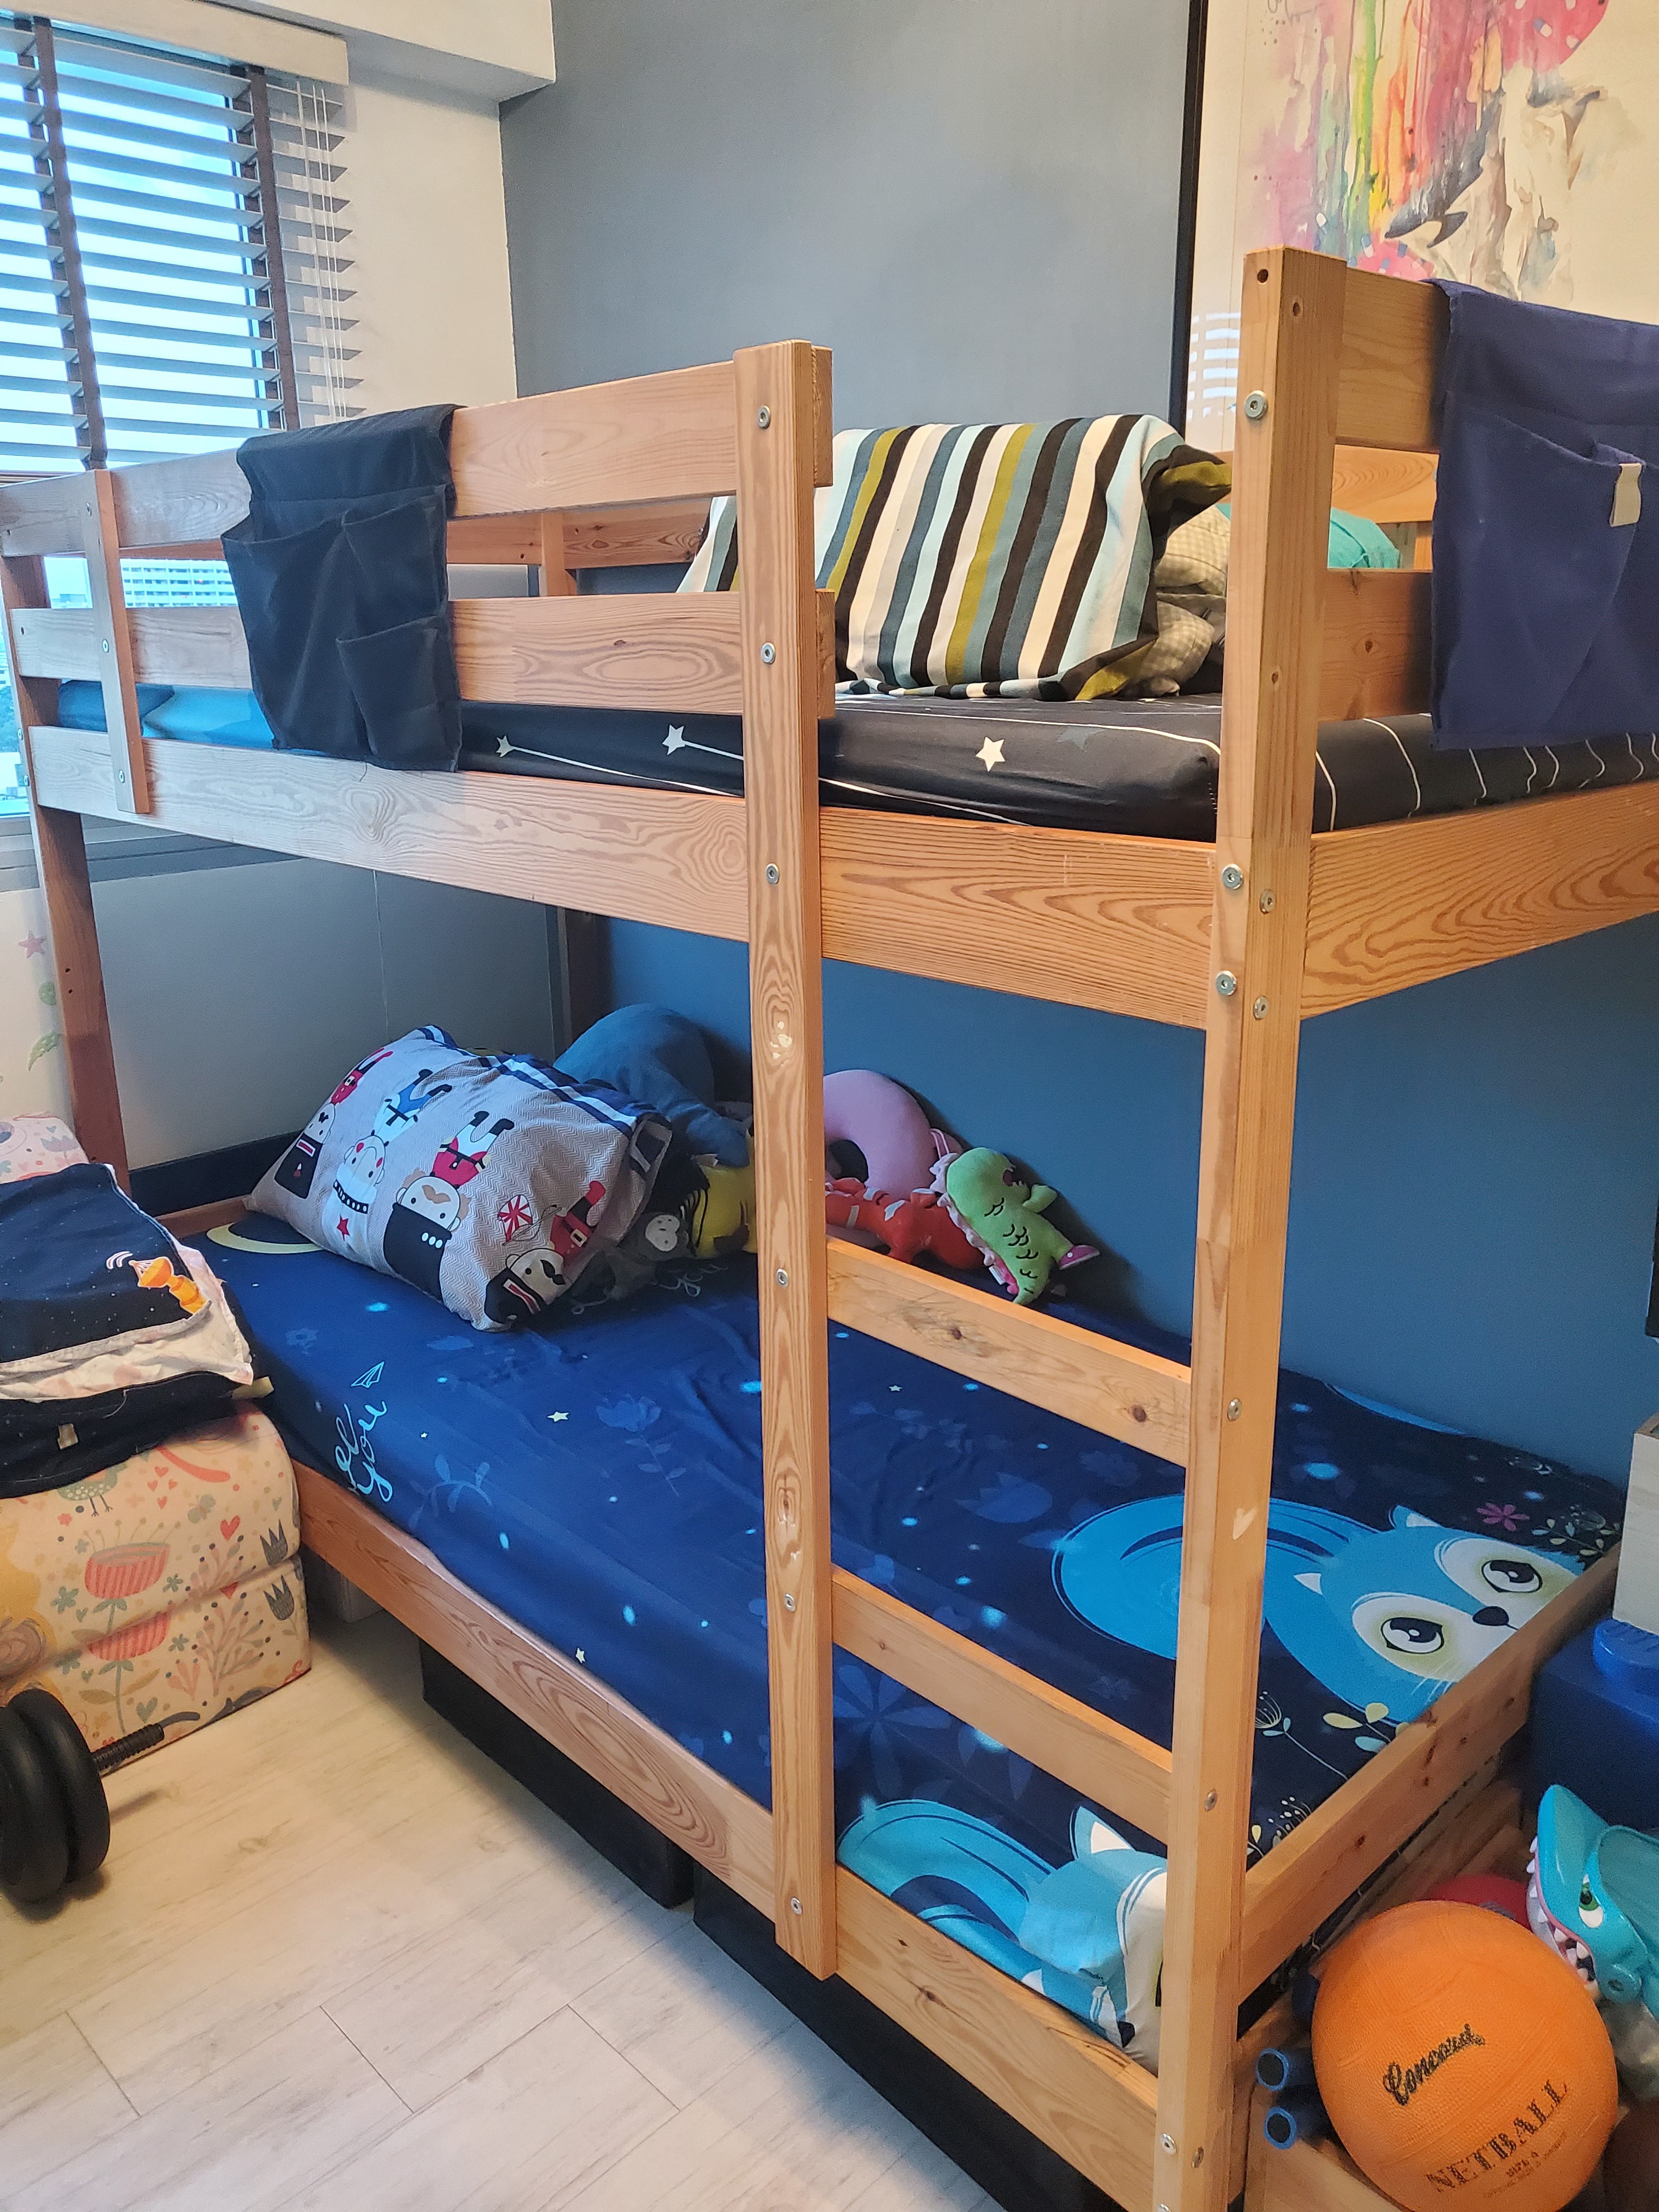 Ikea Bunk Bed Furniture Home Living, L Shaped Bunk Beds Ikea